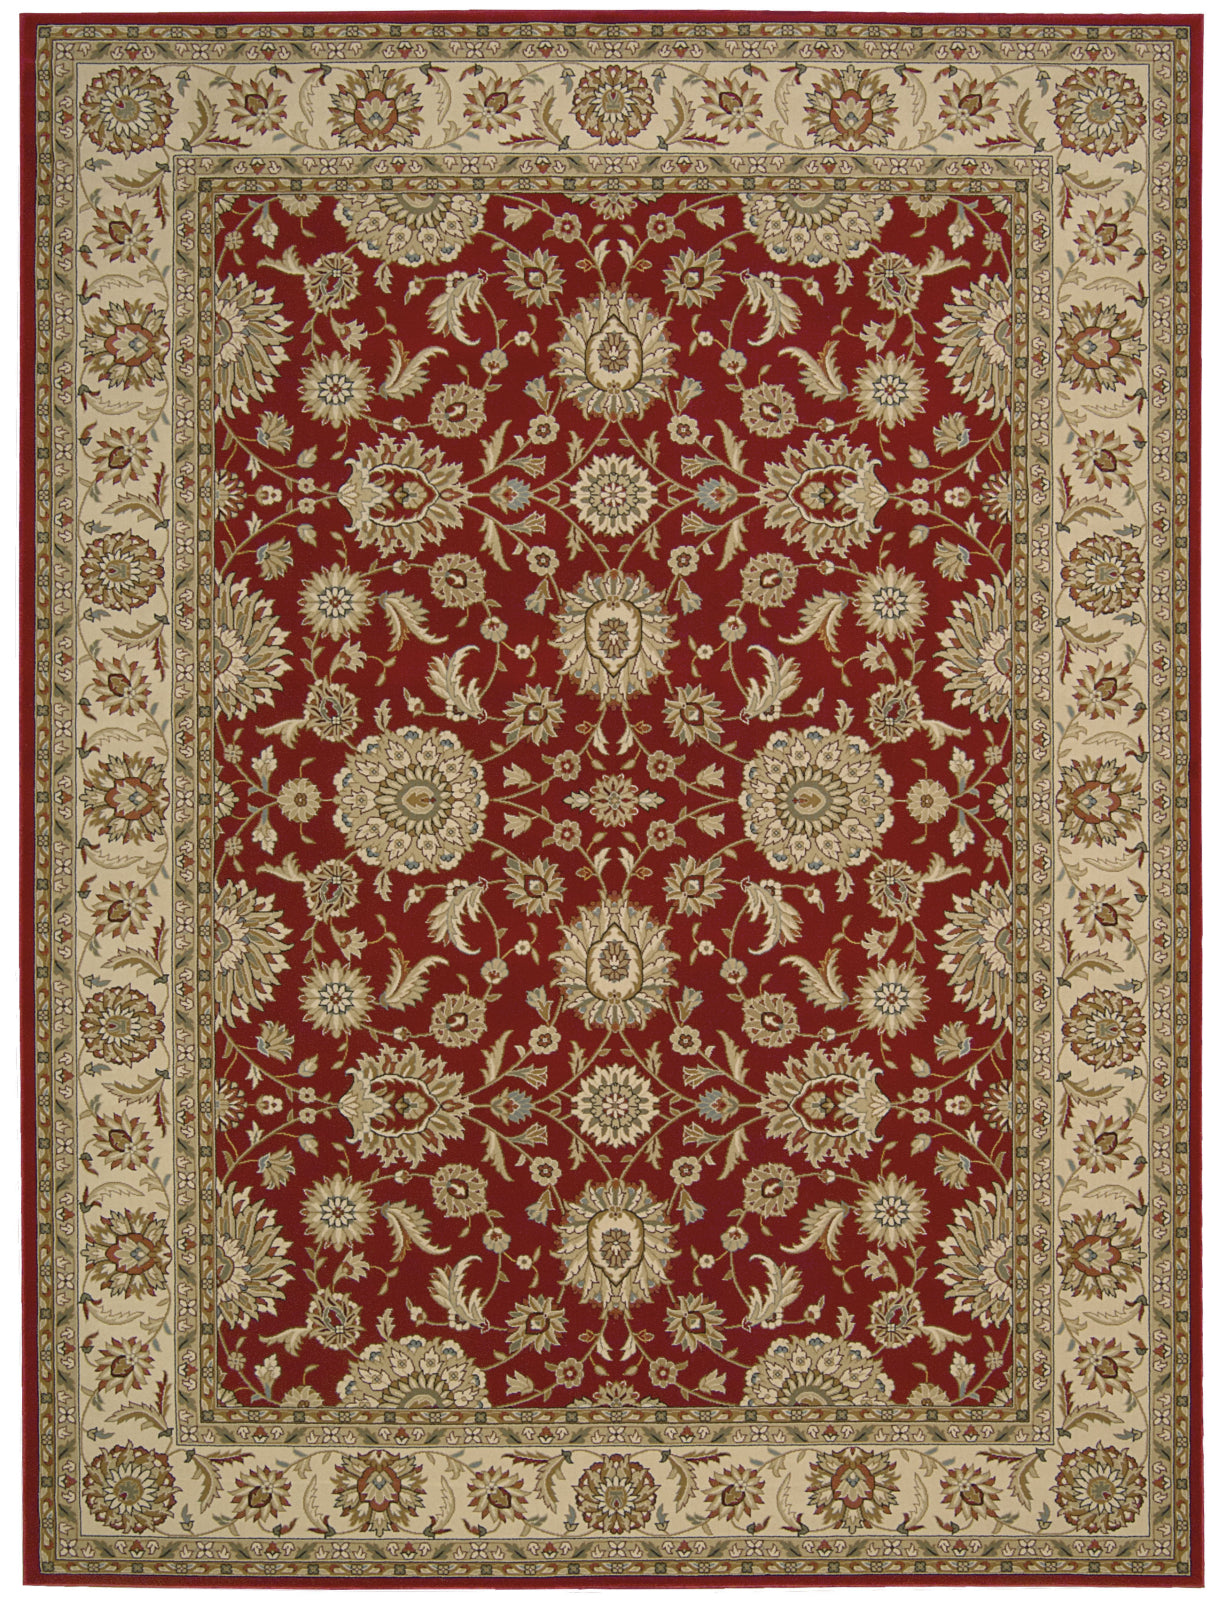 Nourison Persian Crown PC002 Red Area Rug main image